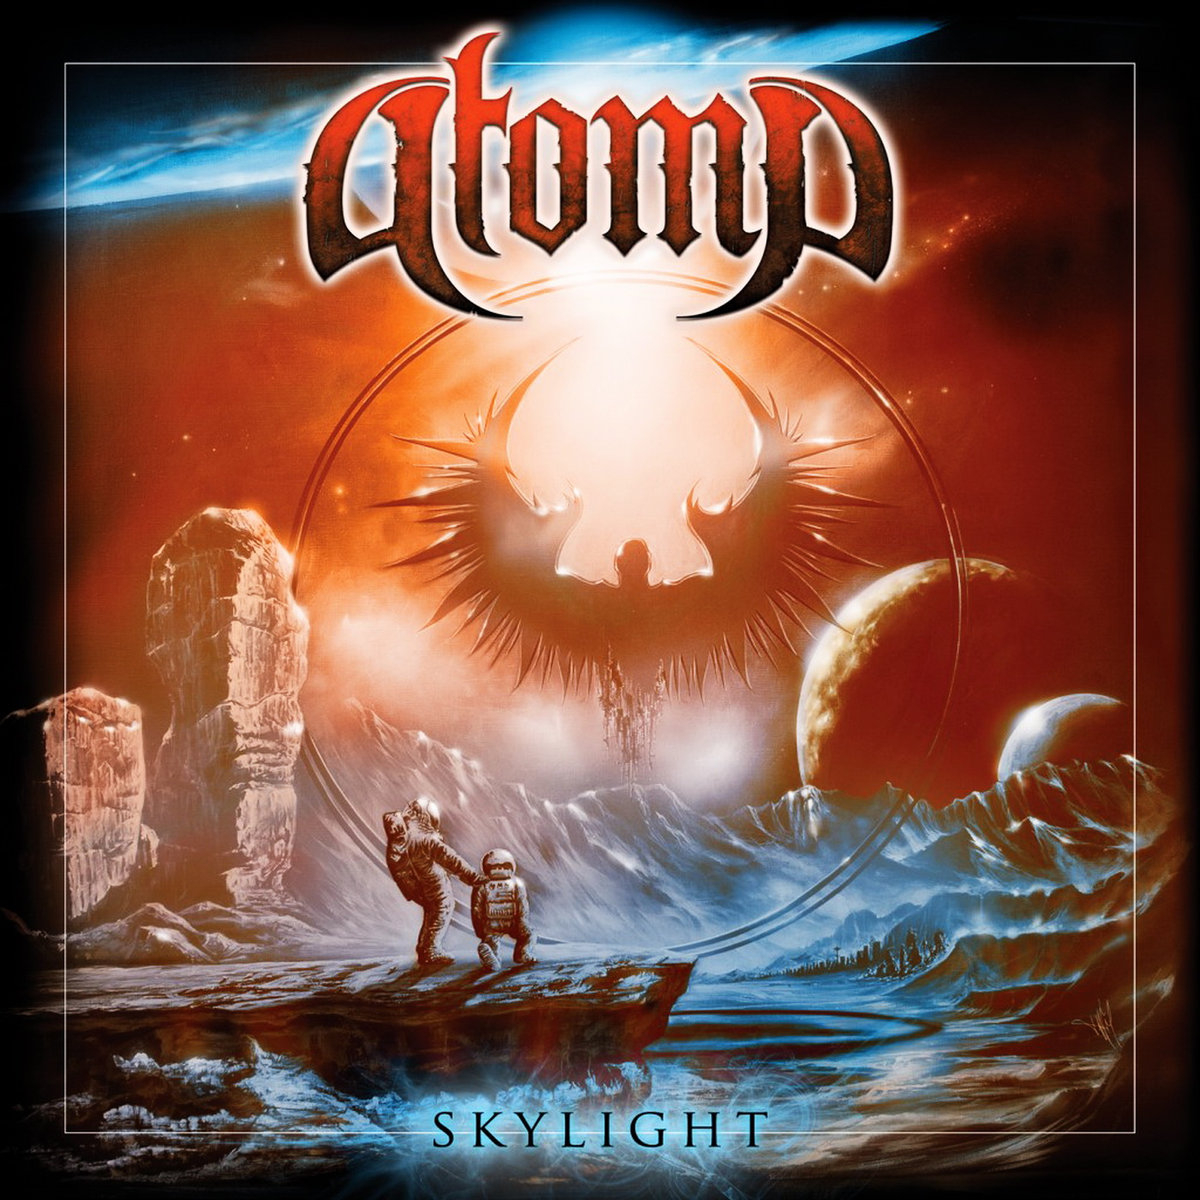 http://www.metalmusicarchives.com/images/covers/atoma-skylight-20171204020820.jpg